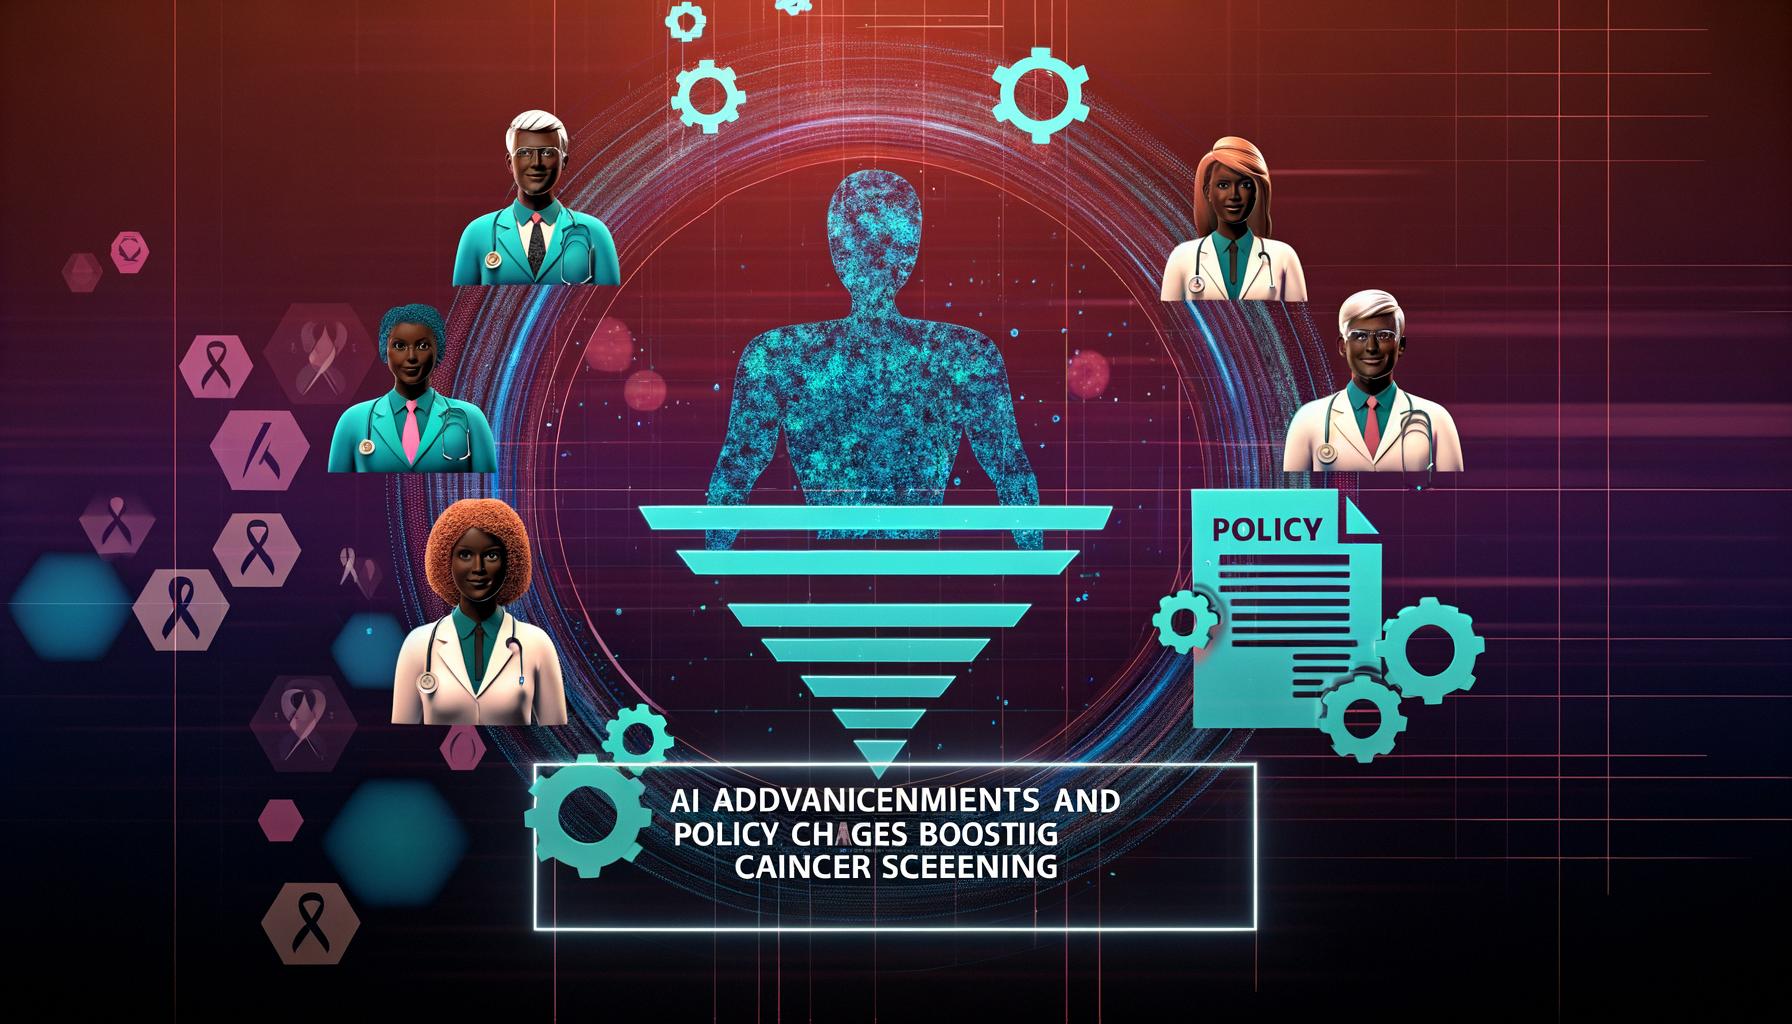 AI and policy changes enhance cancer screening, impacting early detection and health equity.